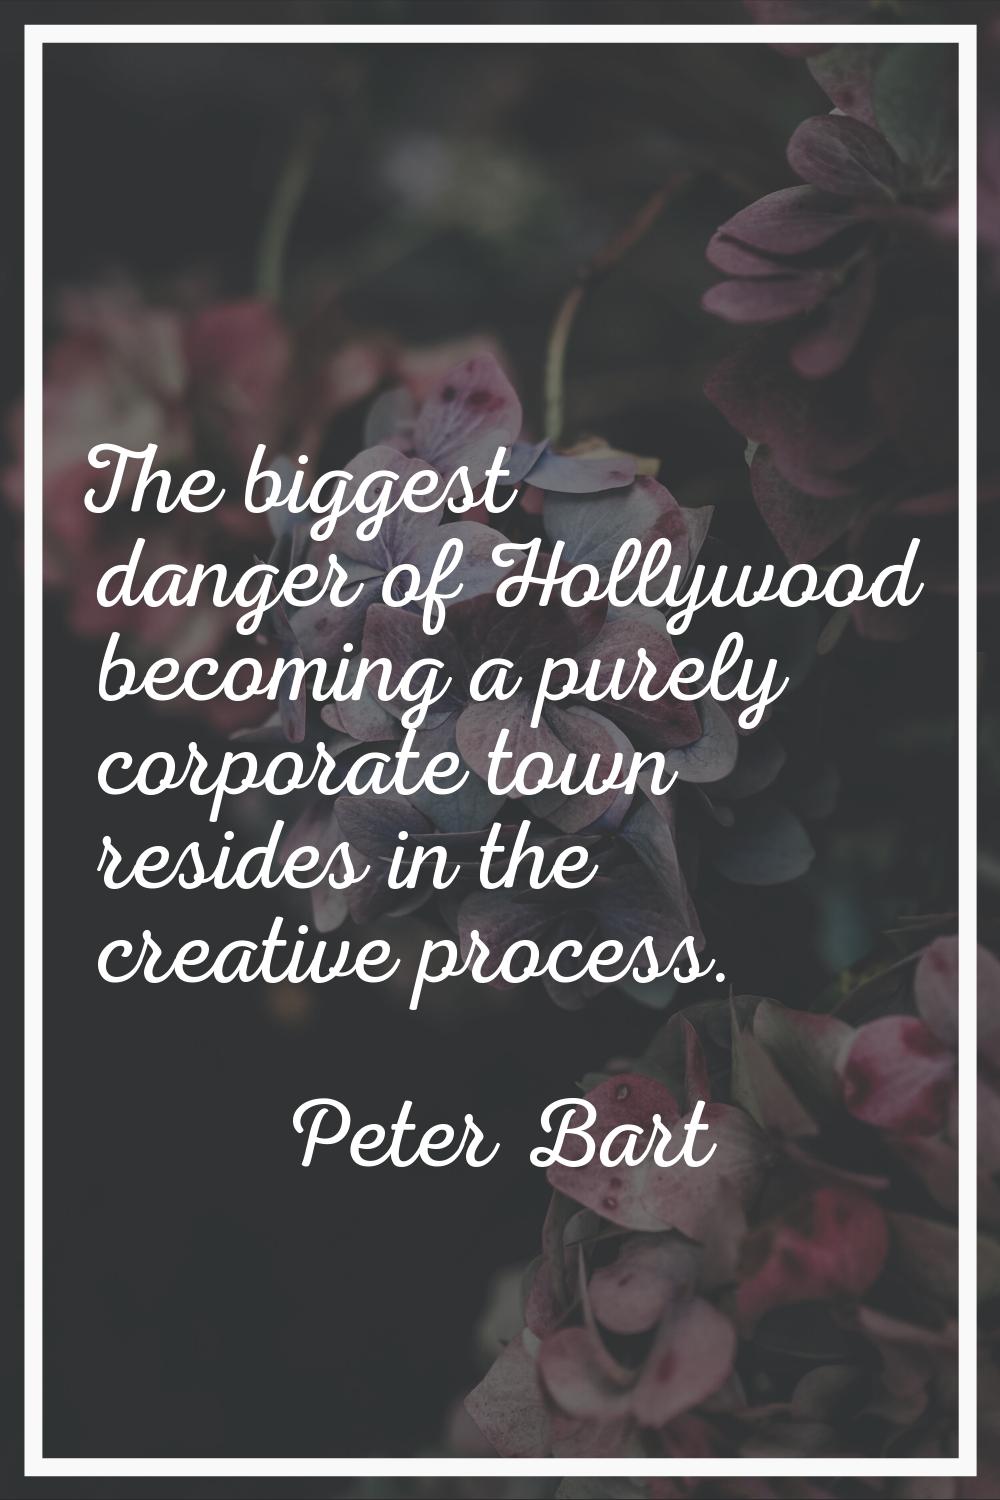 The biggest danger of Hollywood becoming a purely corporate town resides in the creative process.